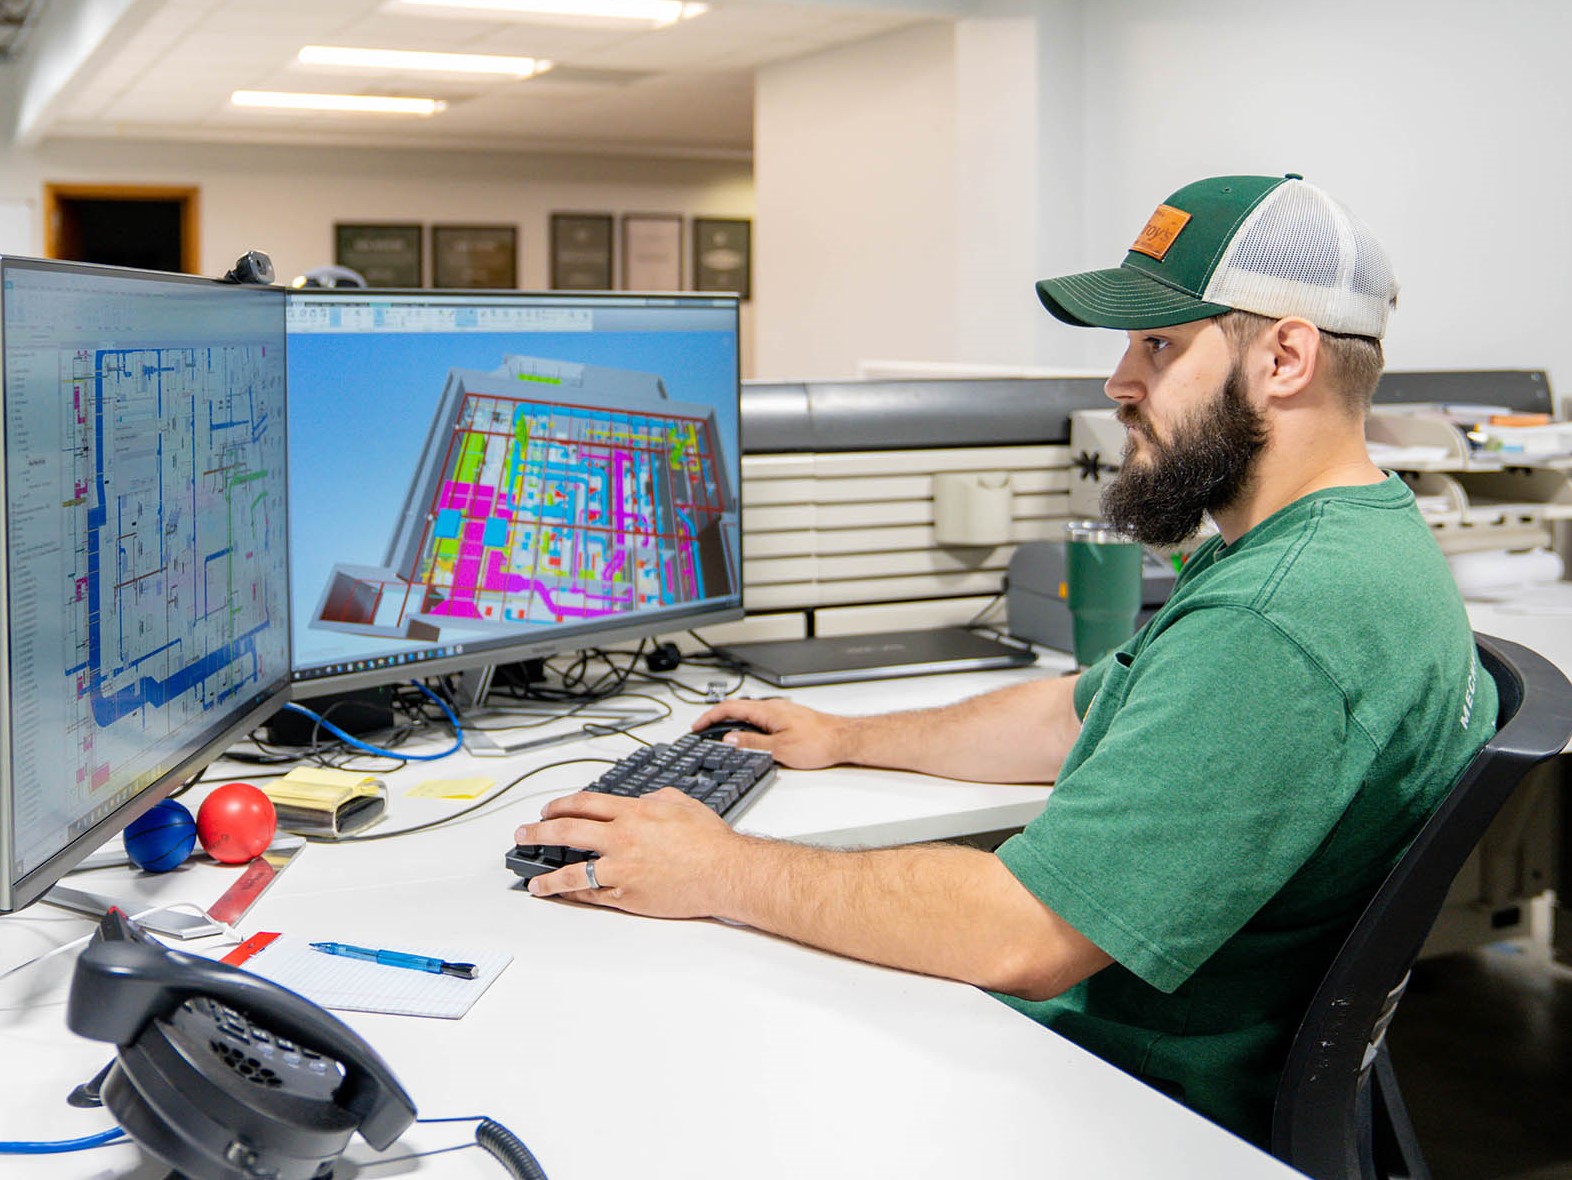 Joey Towle, McElroy’s BIM designer, uses Building Information Modeling software to ensure that mechanical systems work together as expected.